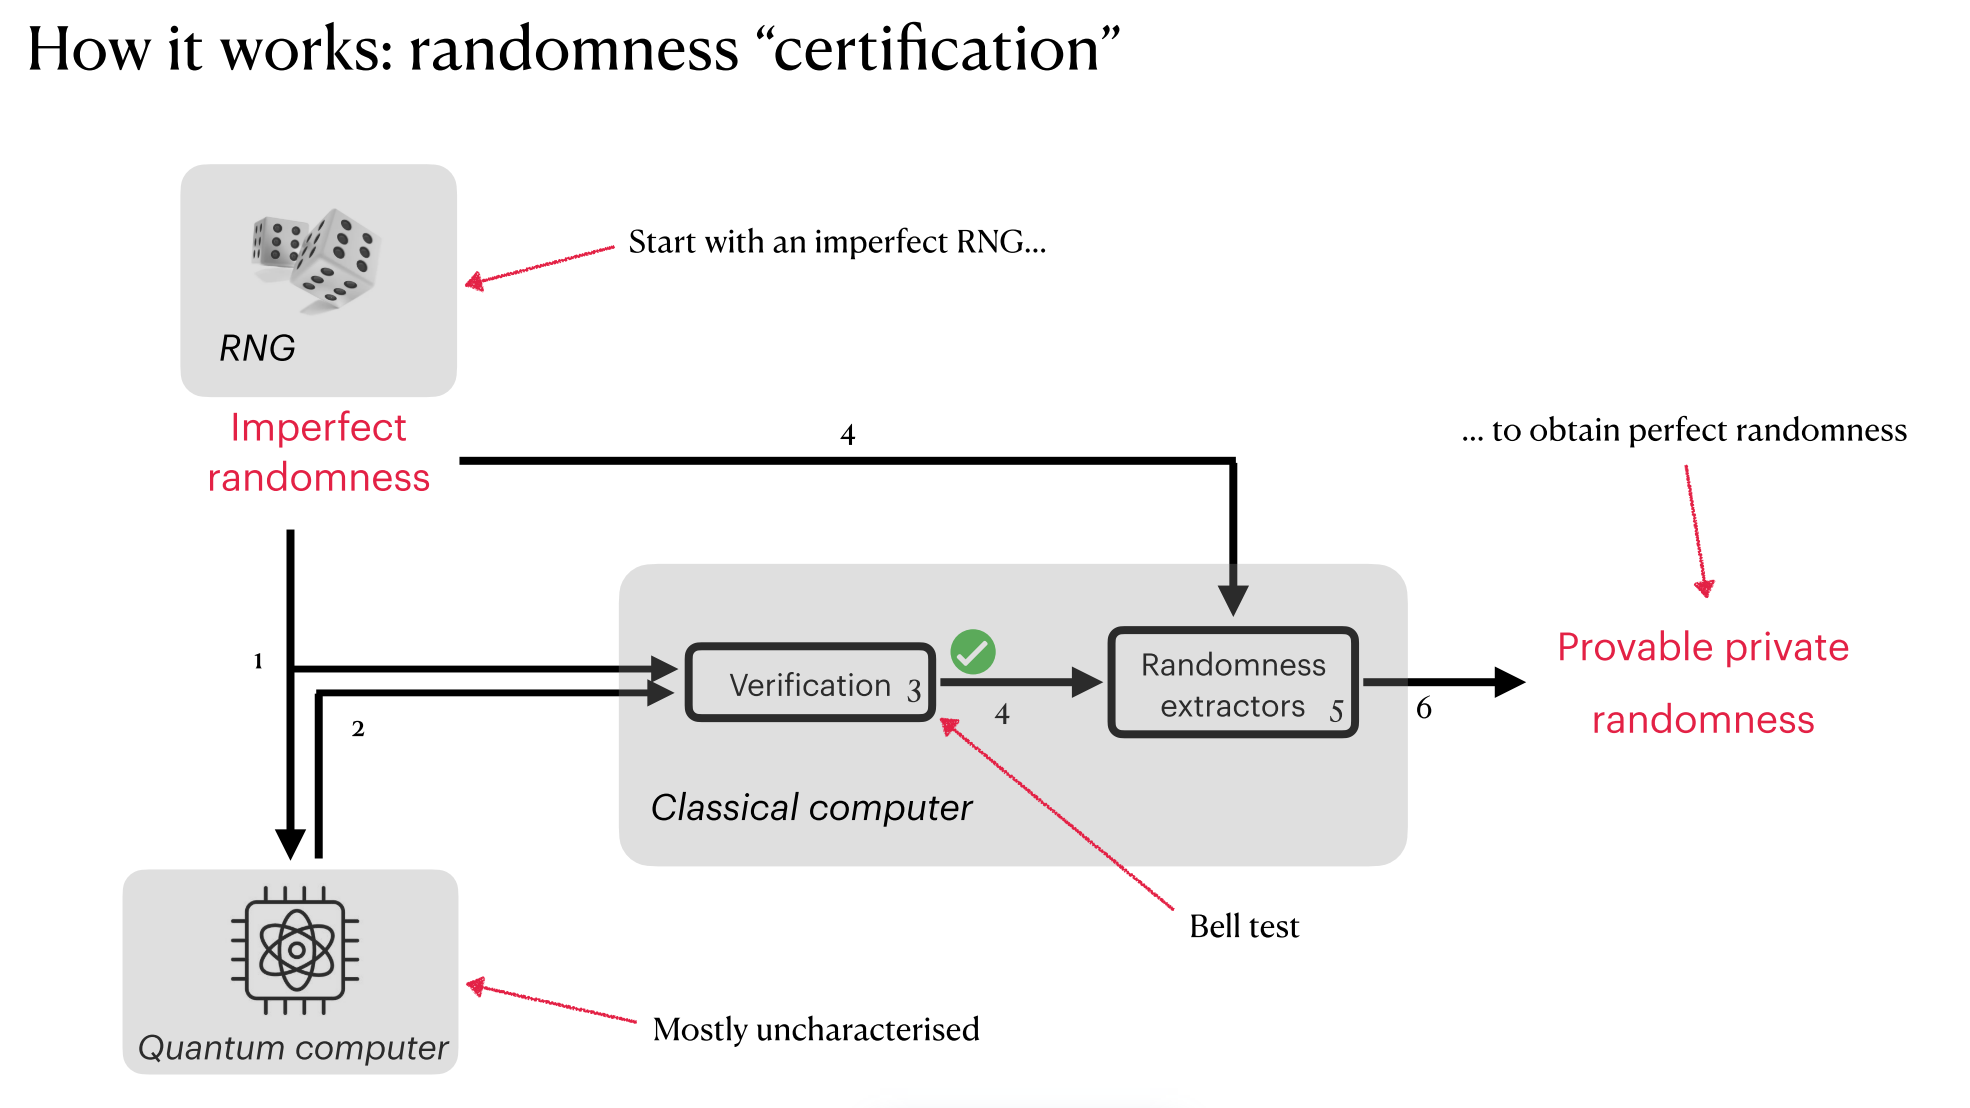 Chart showing how randomness certification works